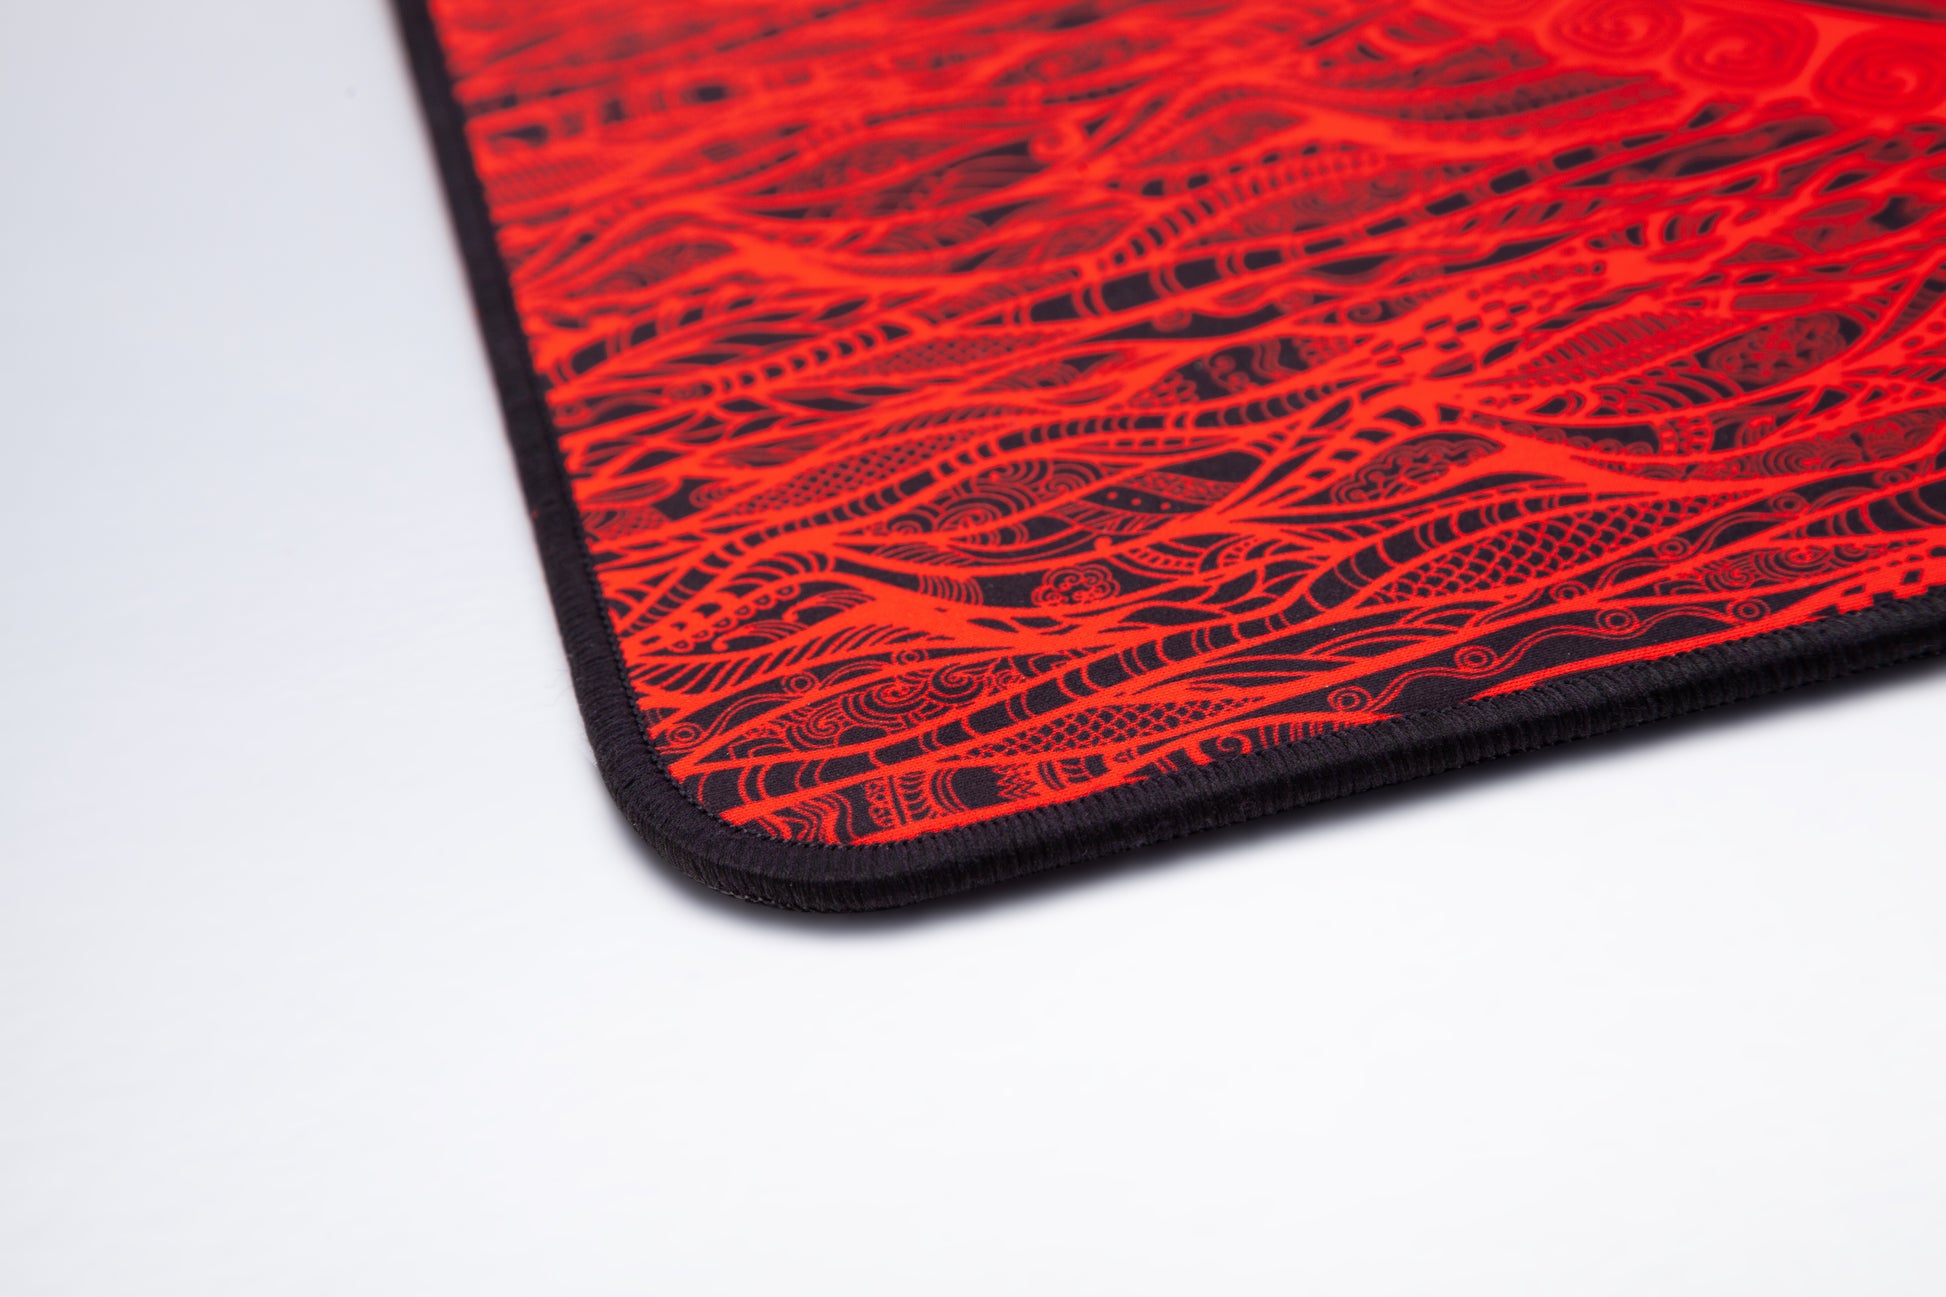 EspTiger Qingsui Xuan Gaming Mouse Pad - Large (480 x 400 x 4mm) - Stitched Edges, Non-Slip Rubber Base, Cloth Surface